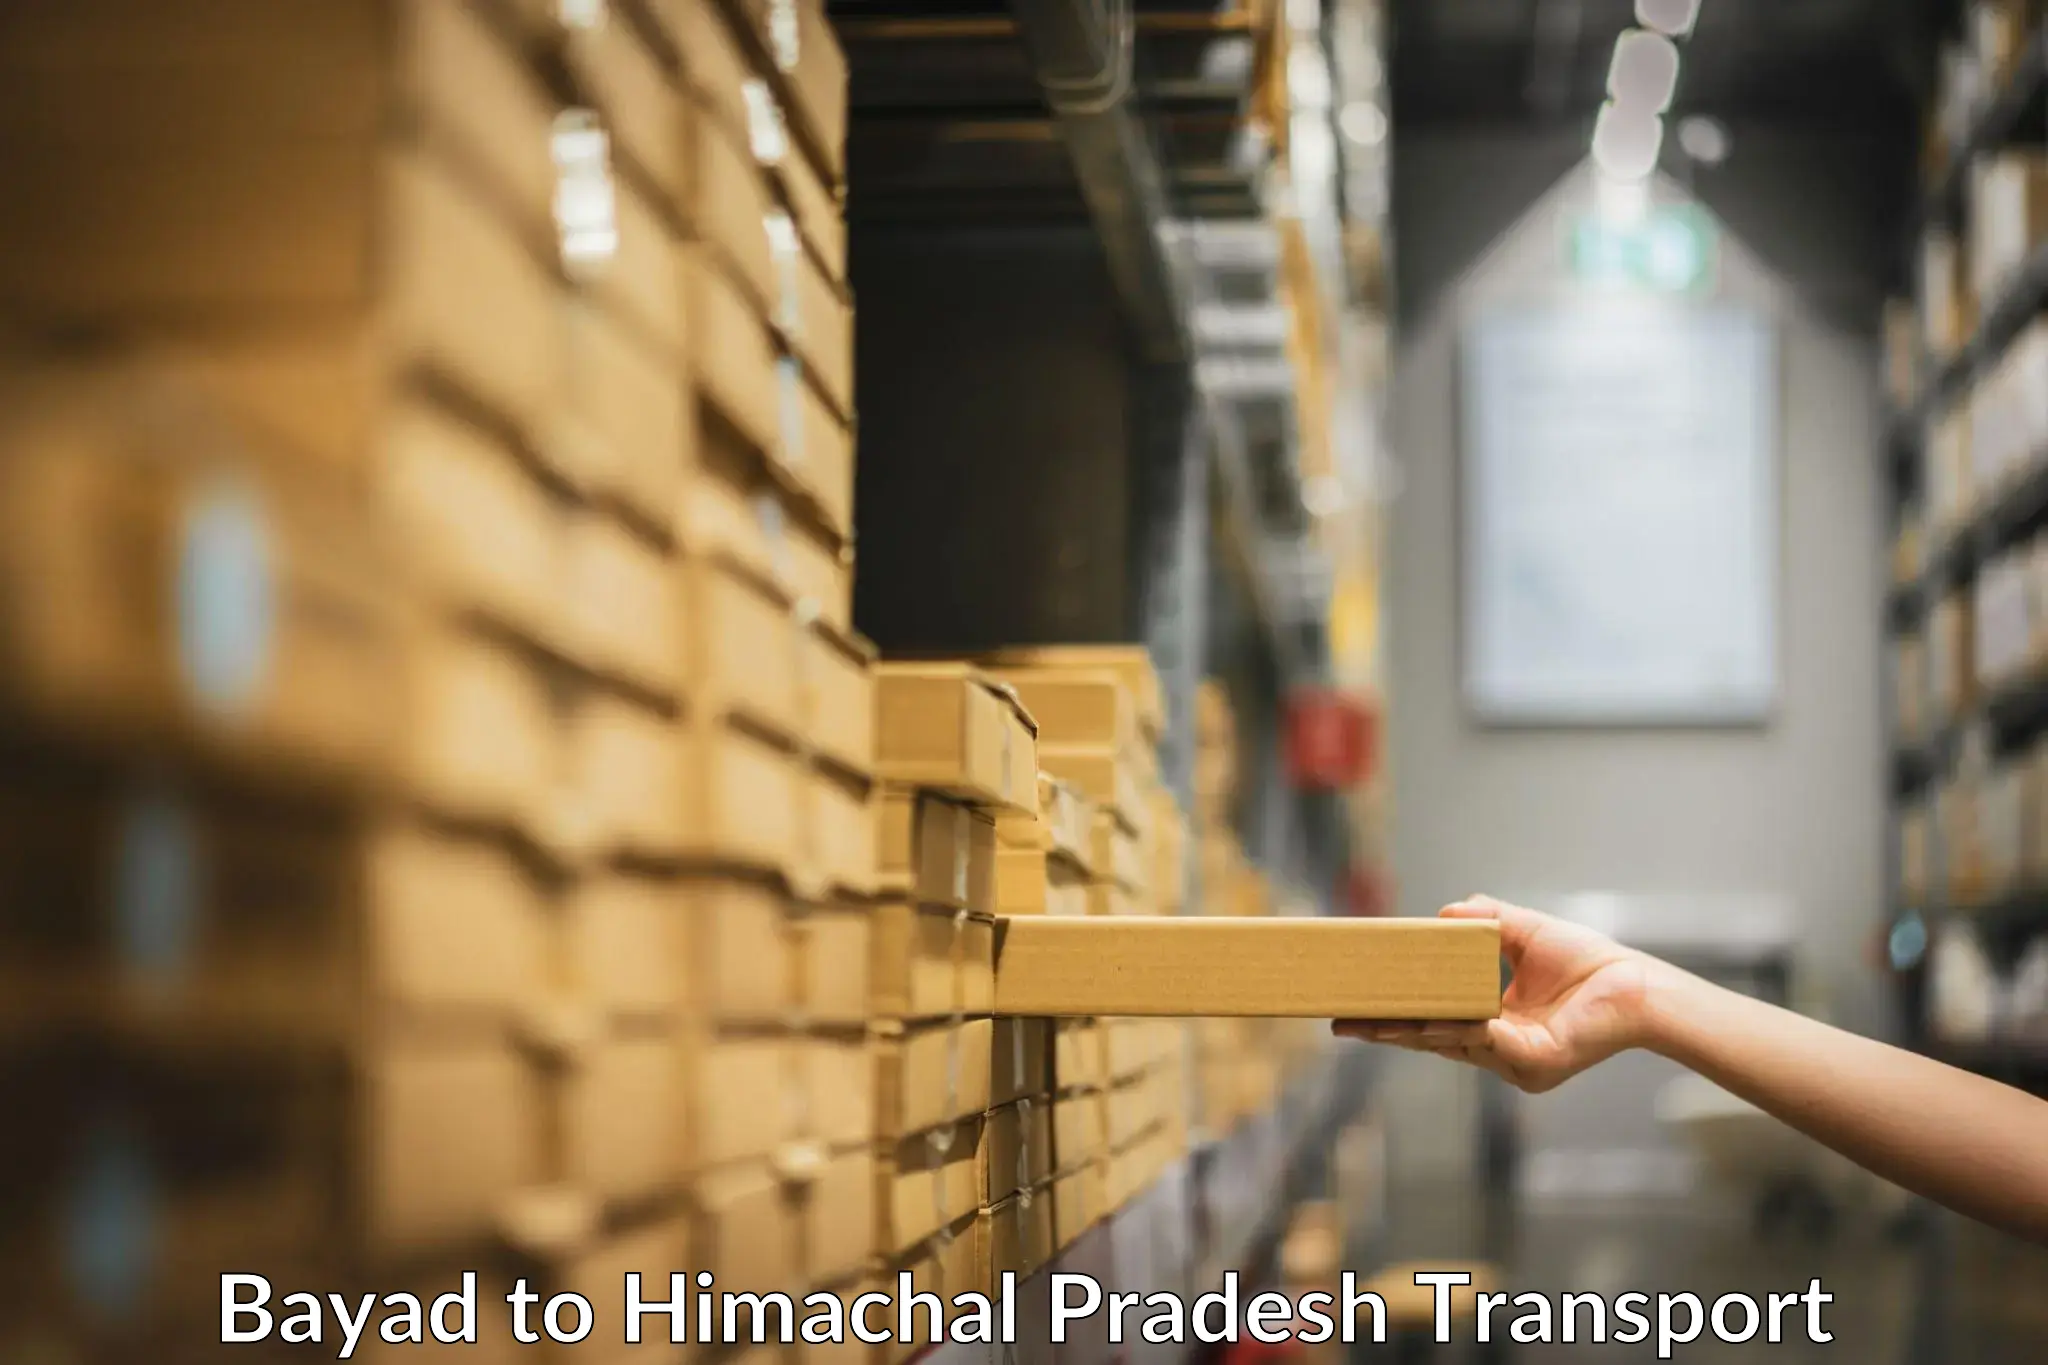 Truck transport companies in India Bayad to Lahaul and Spiti